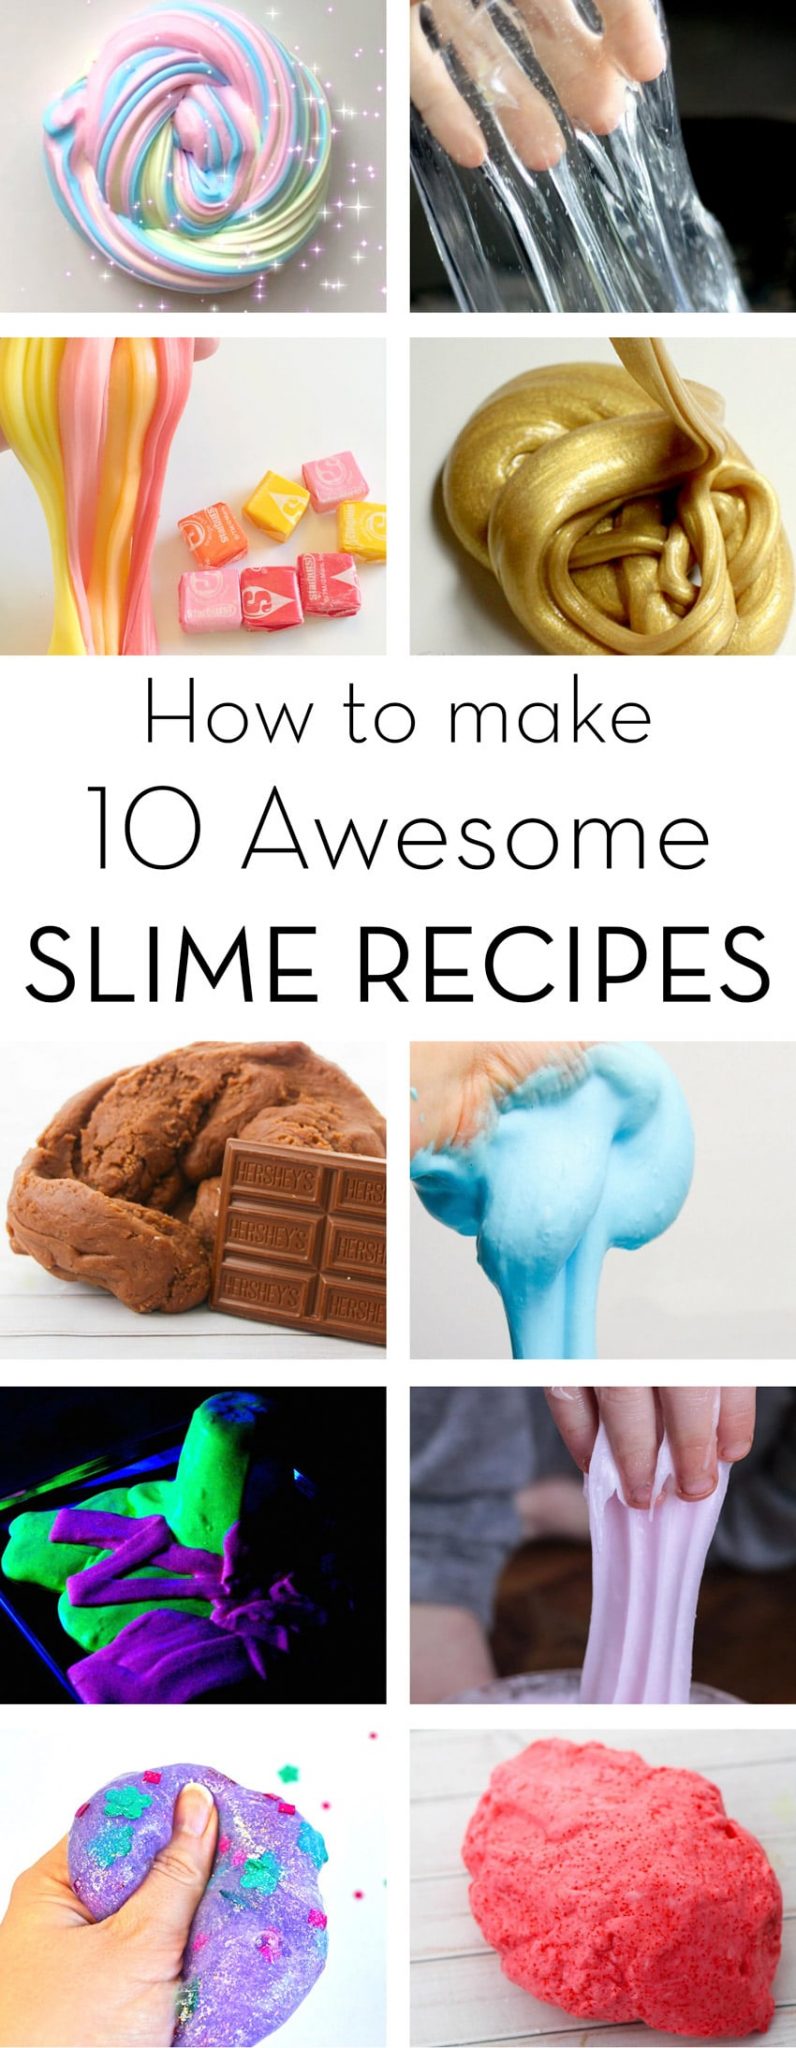 How to Make 10 Cool Slime Recipes Your Kids Will Love